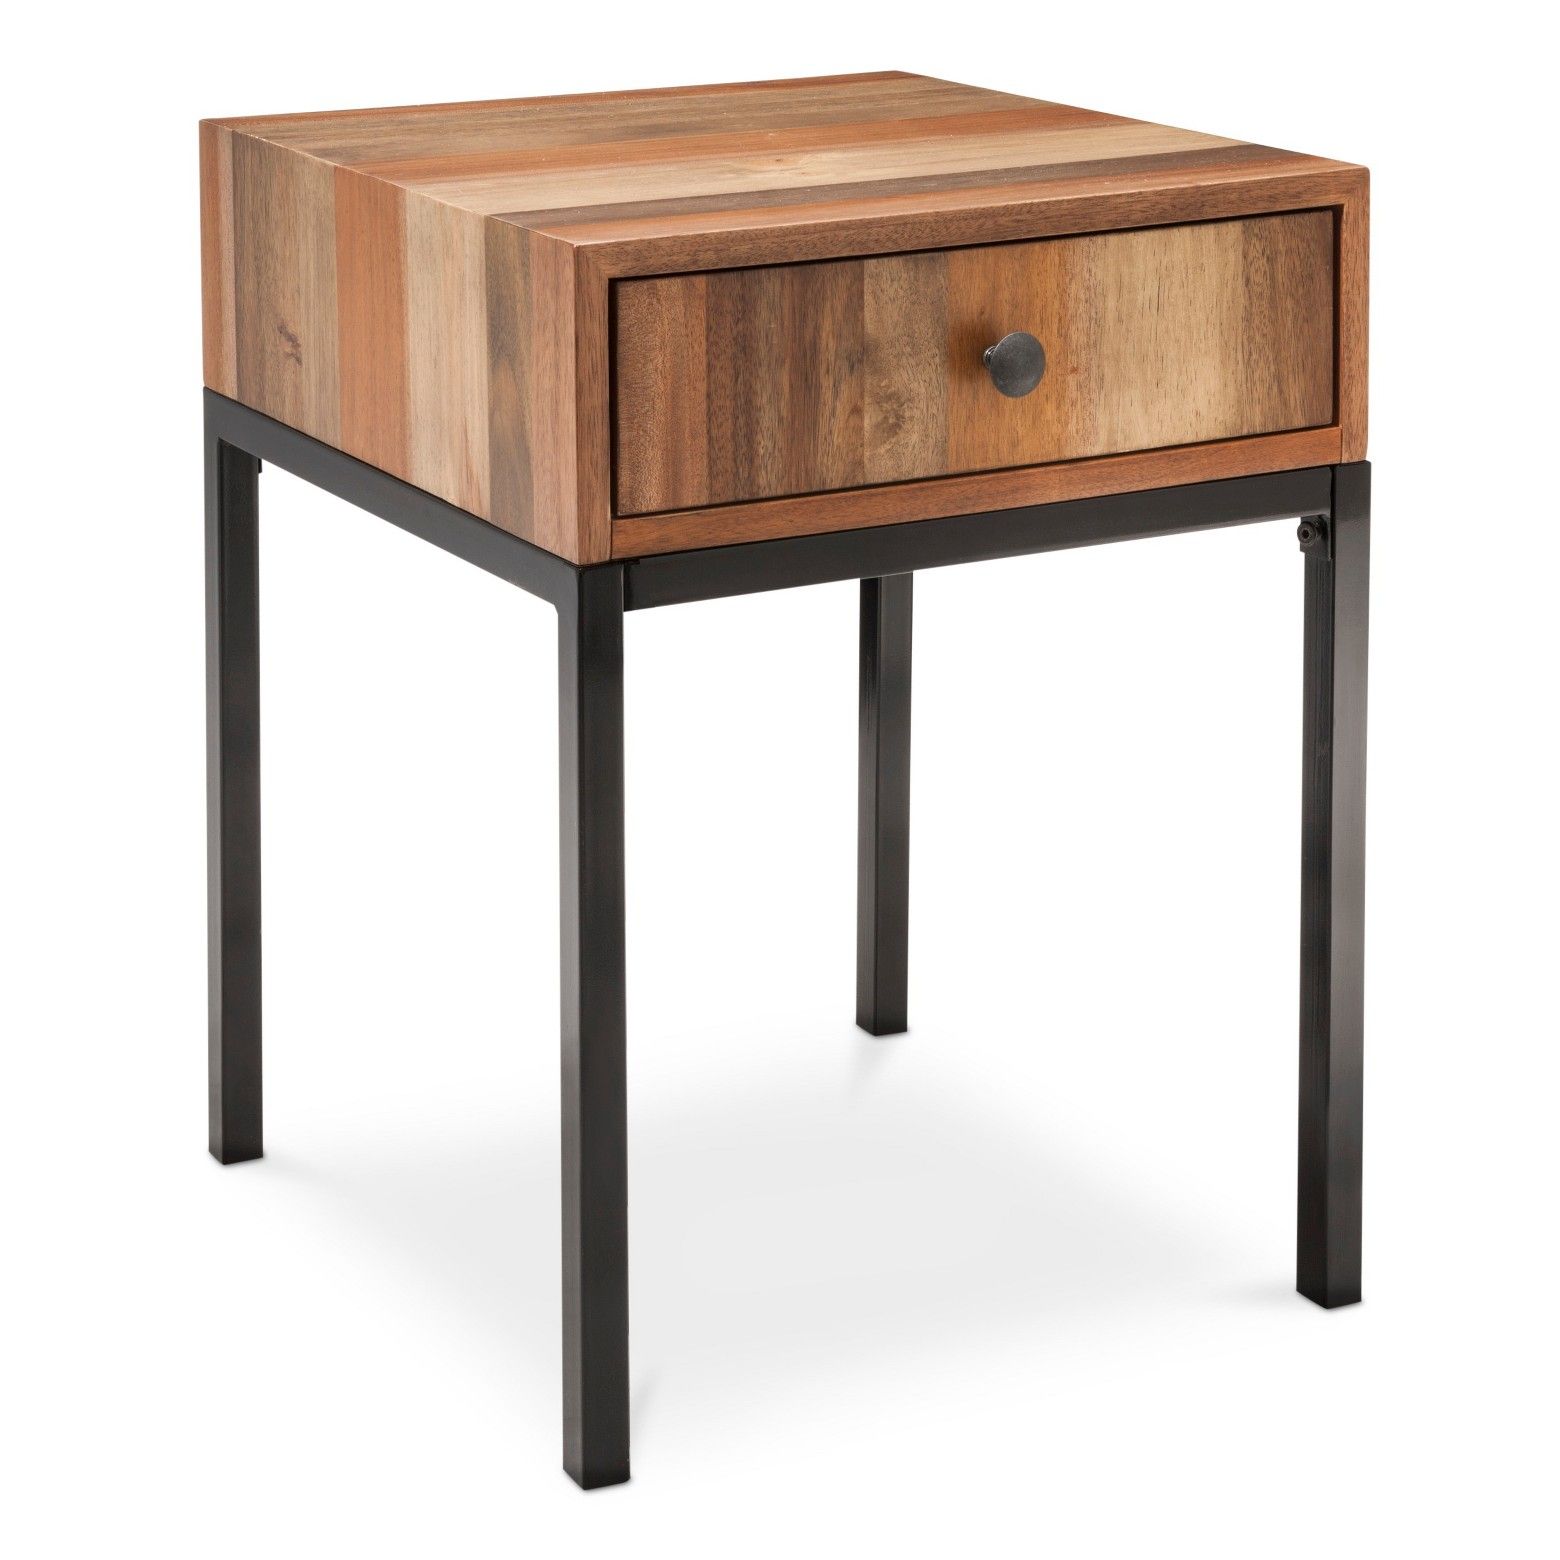 hernwood mixed material side table brown threshold products accent mango wood for the perfect mix style and function from your decor this brings cool adjustable orient lighting